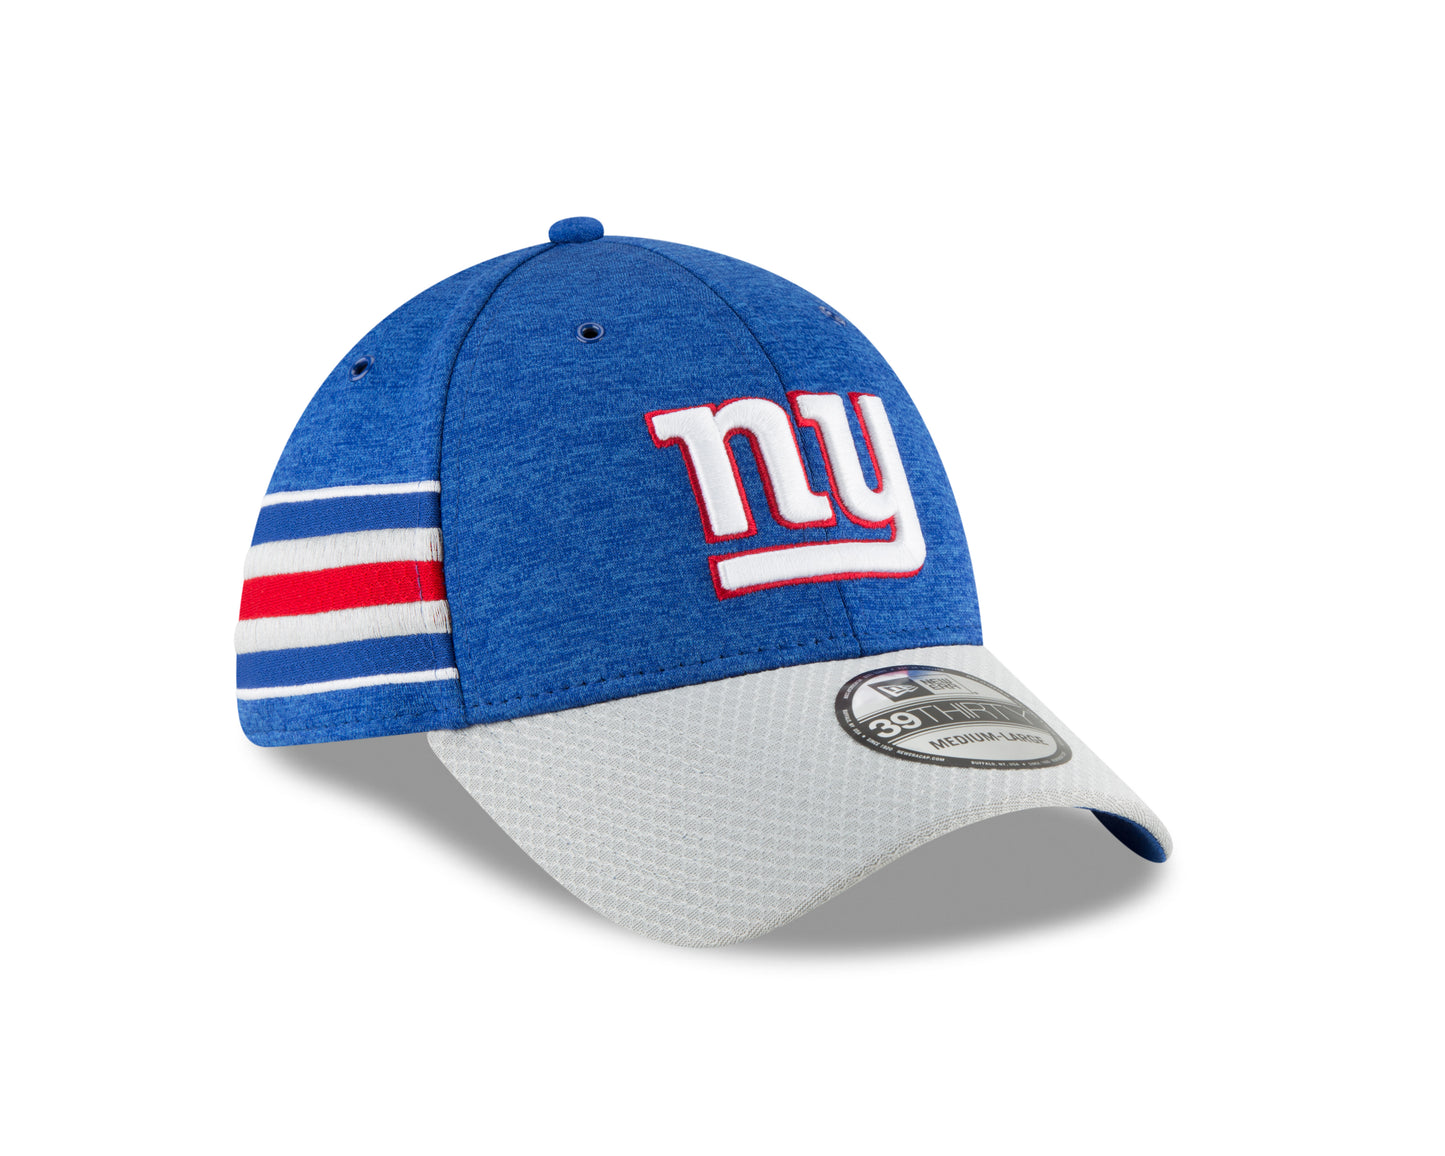 New York Giants New Era 2018 NFL Sideline Home Official 39THIRTY Flex Hat